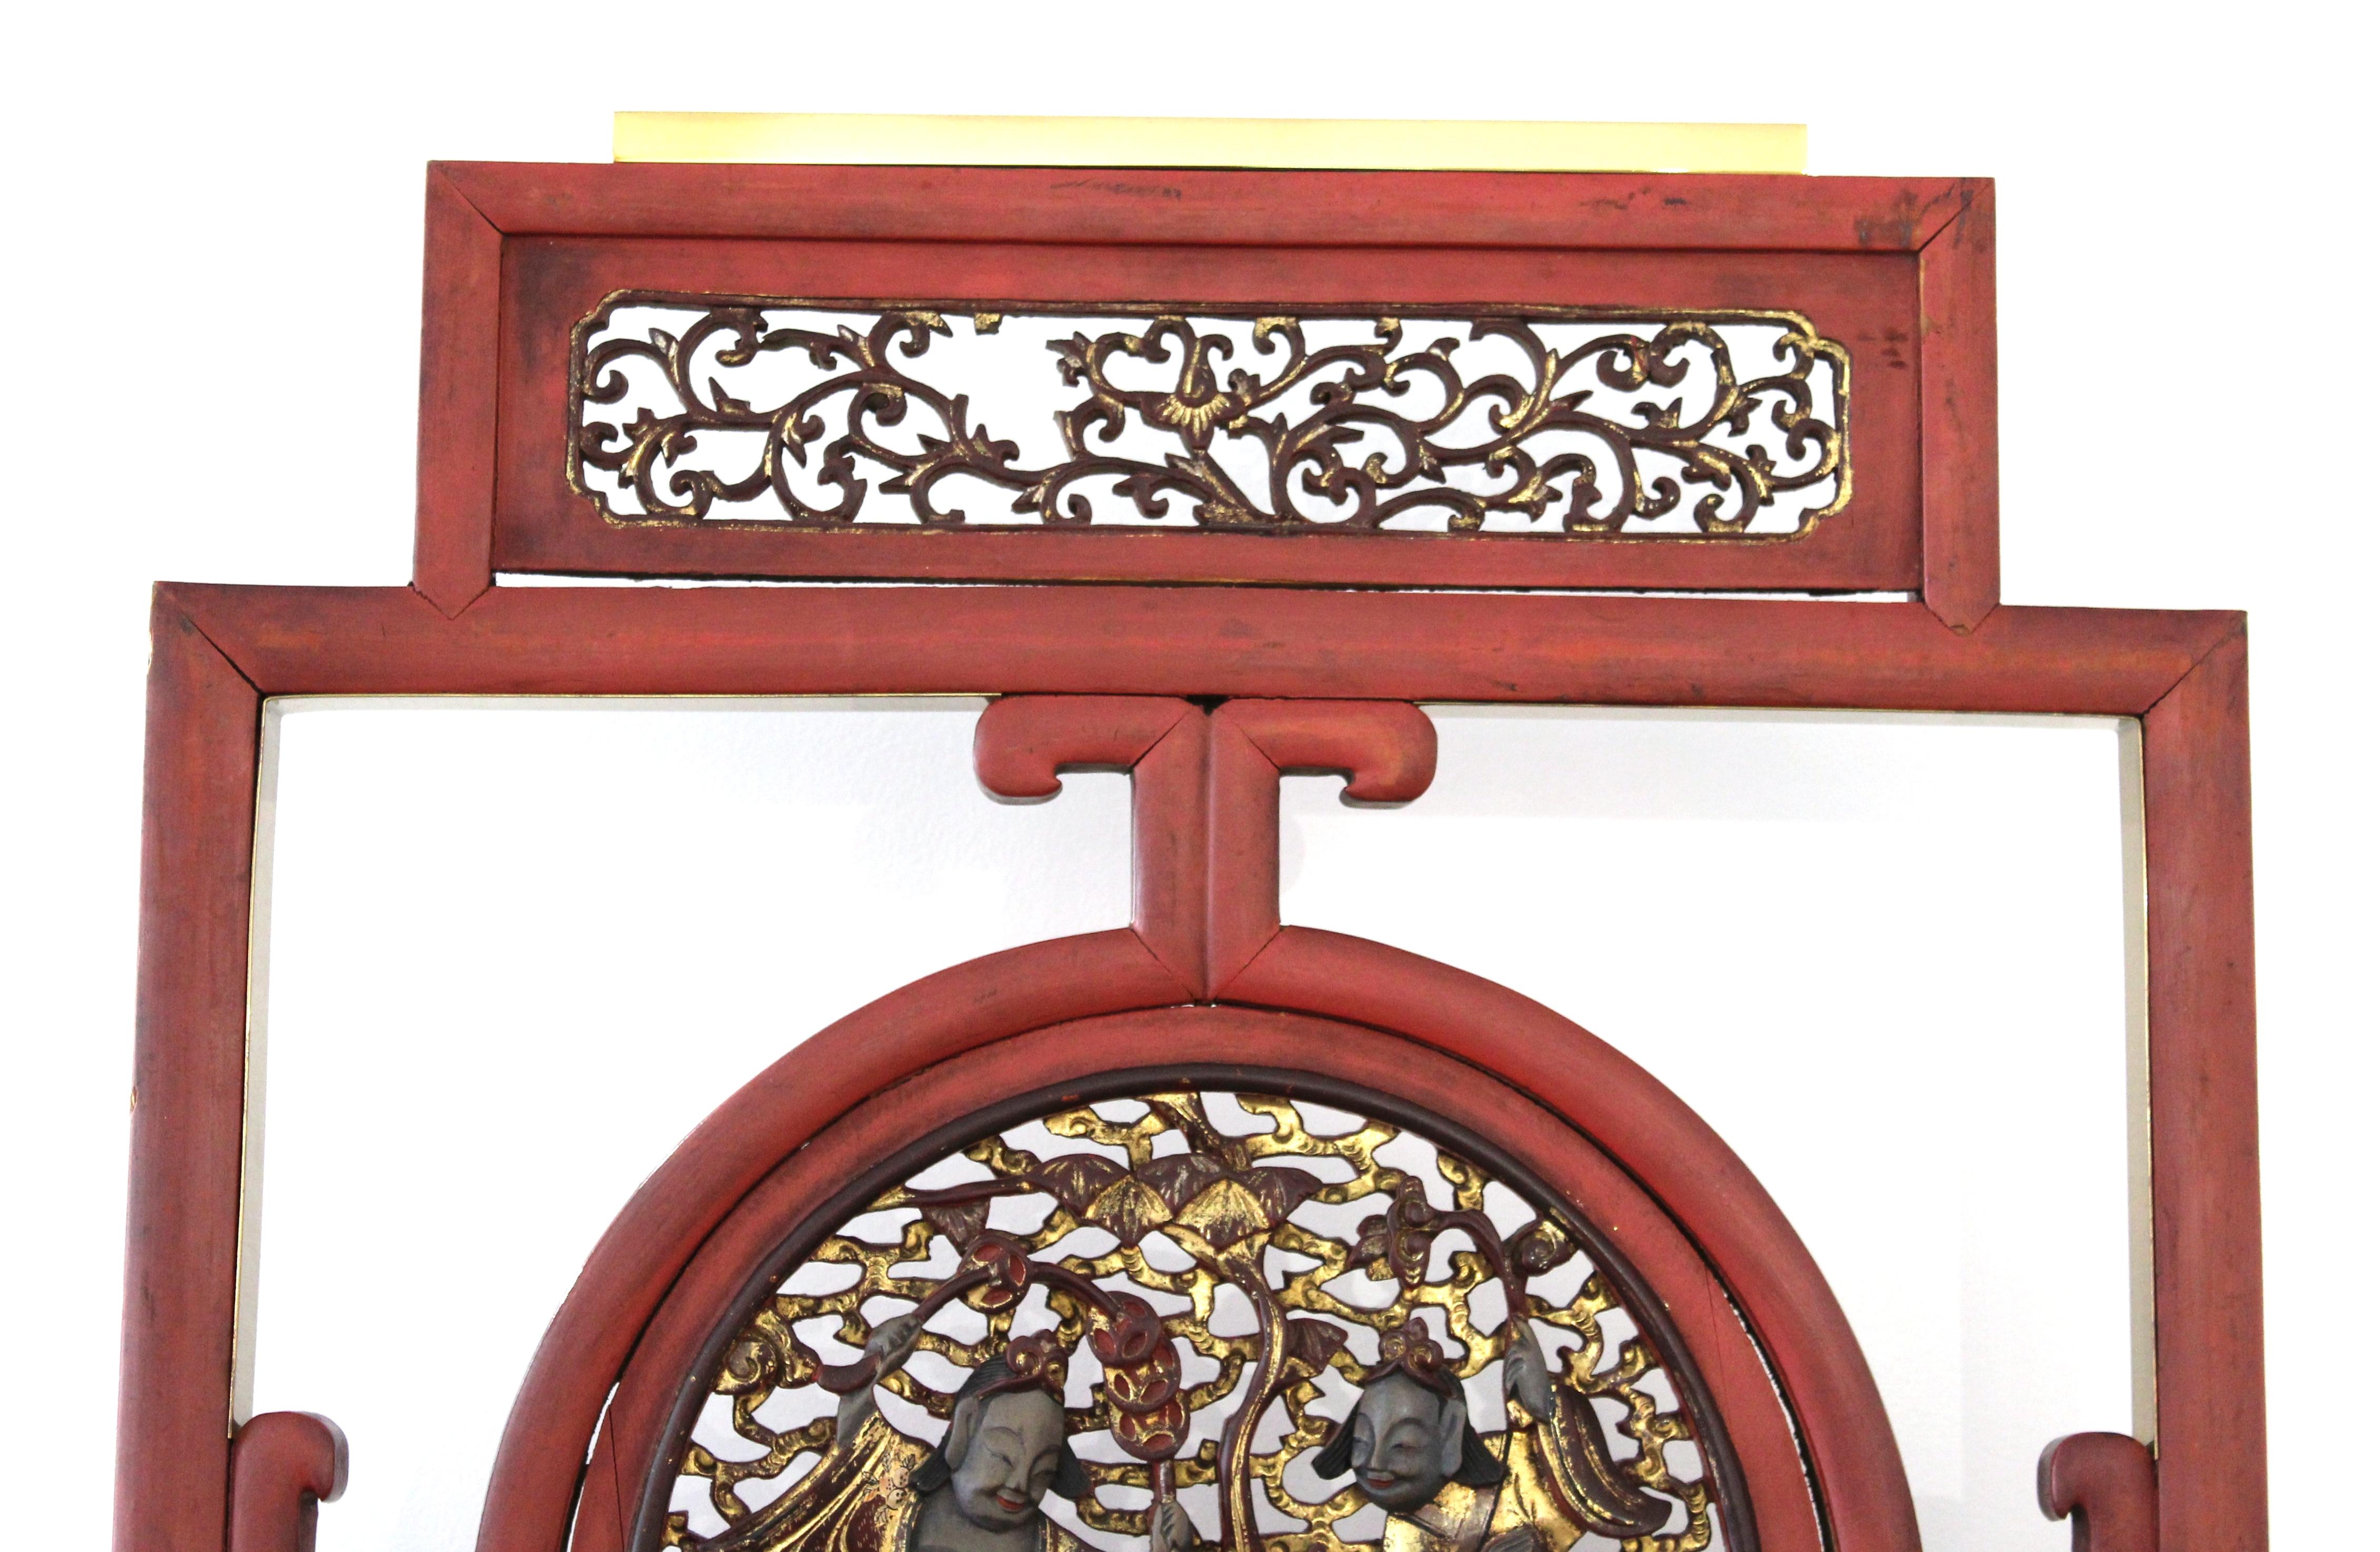 American Asian Modern Lacquer Screen Element Mounted on Stand Attributed to Karl Springer